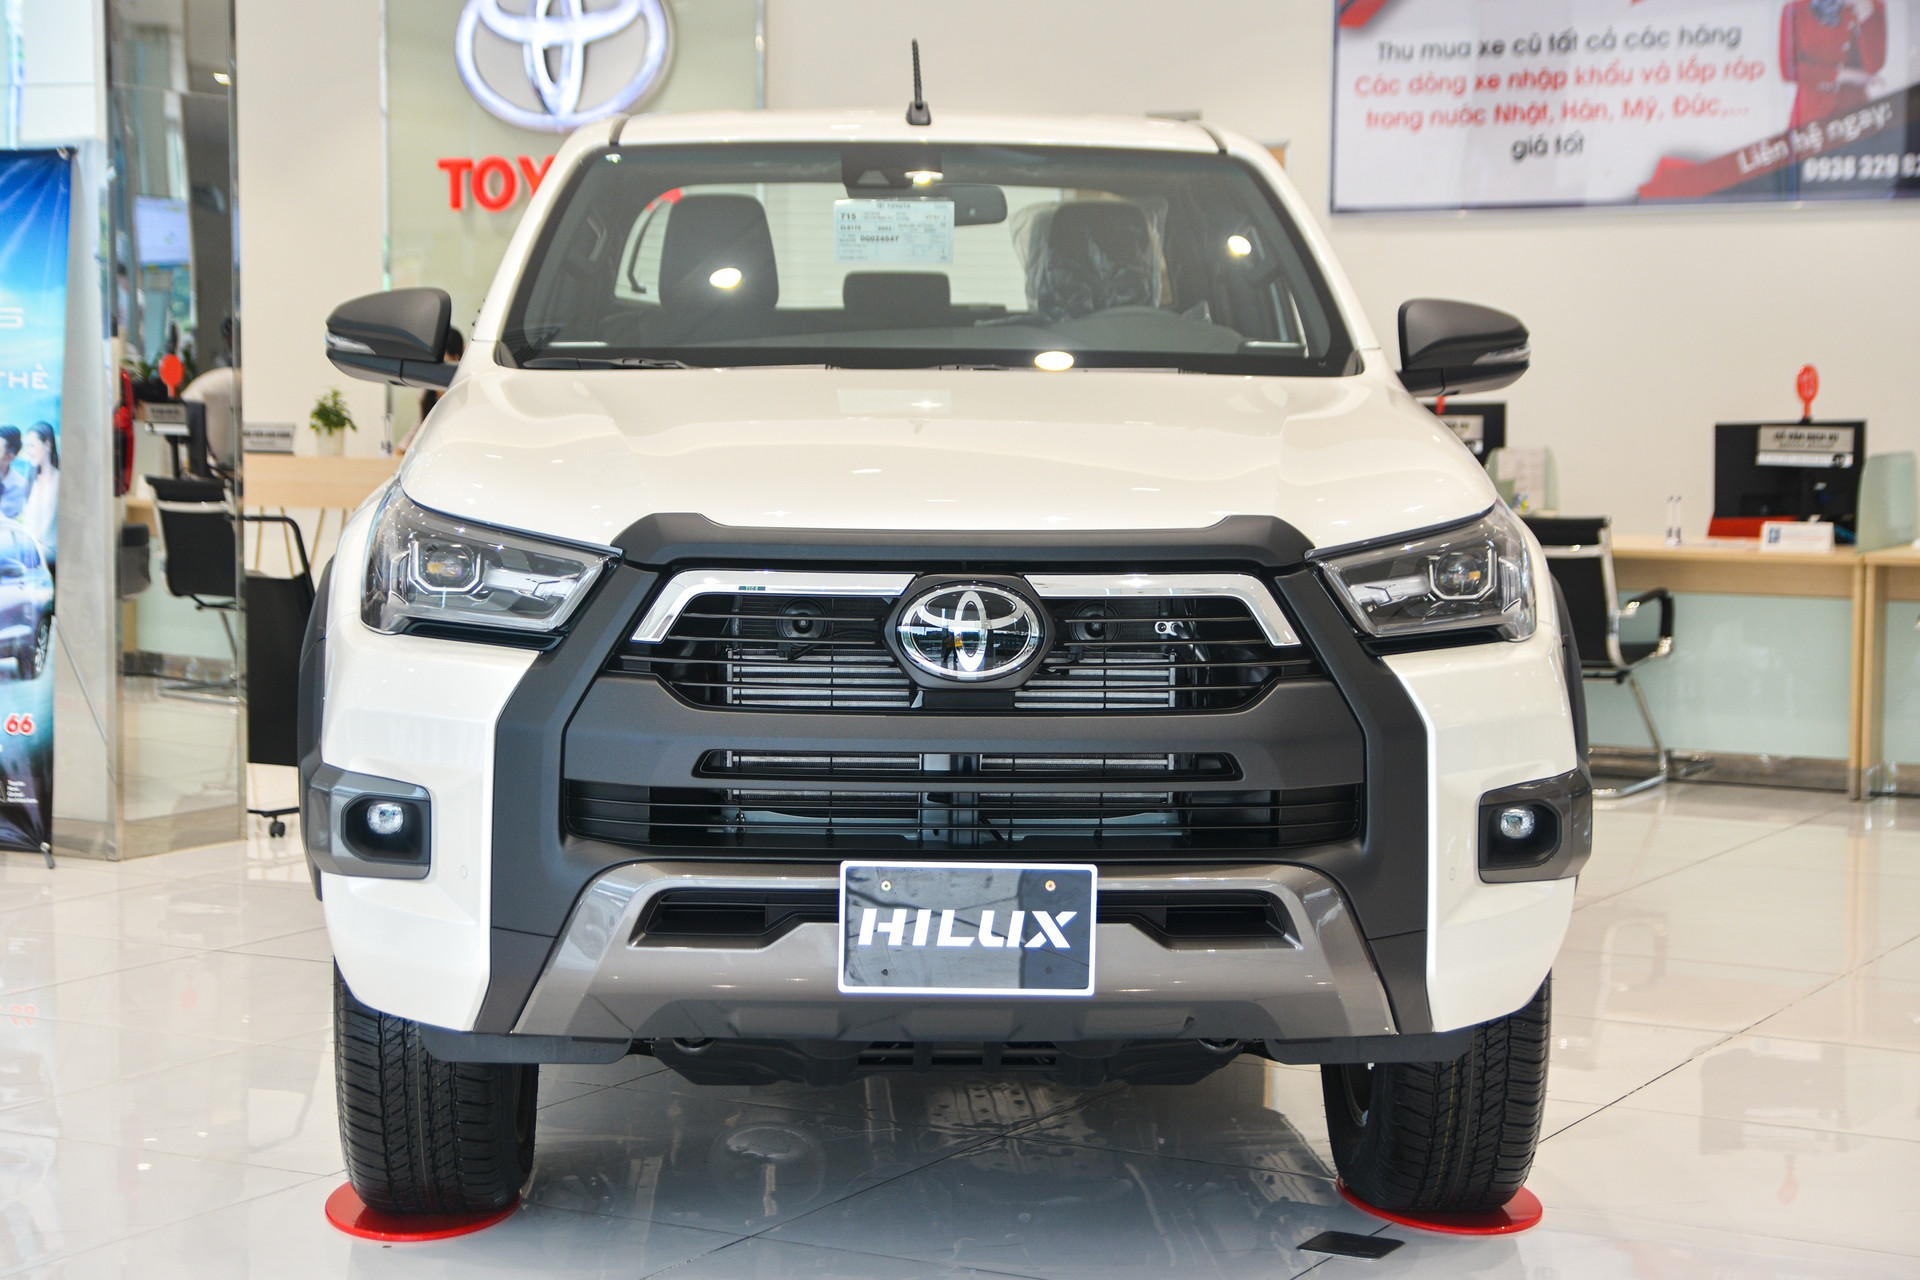 Toyota Hilux moi anh 1